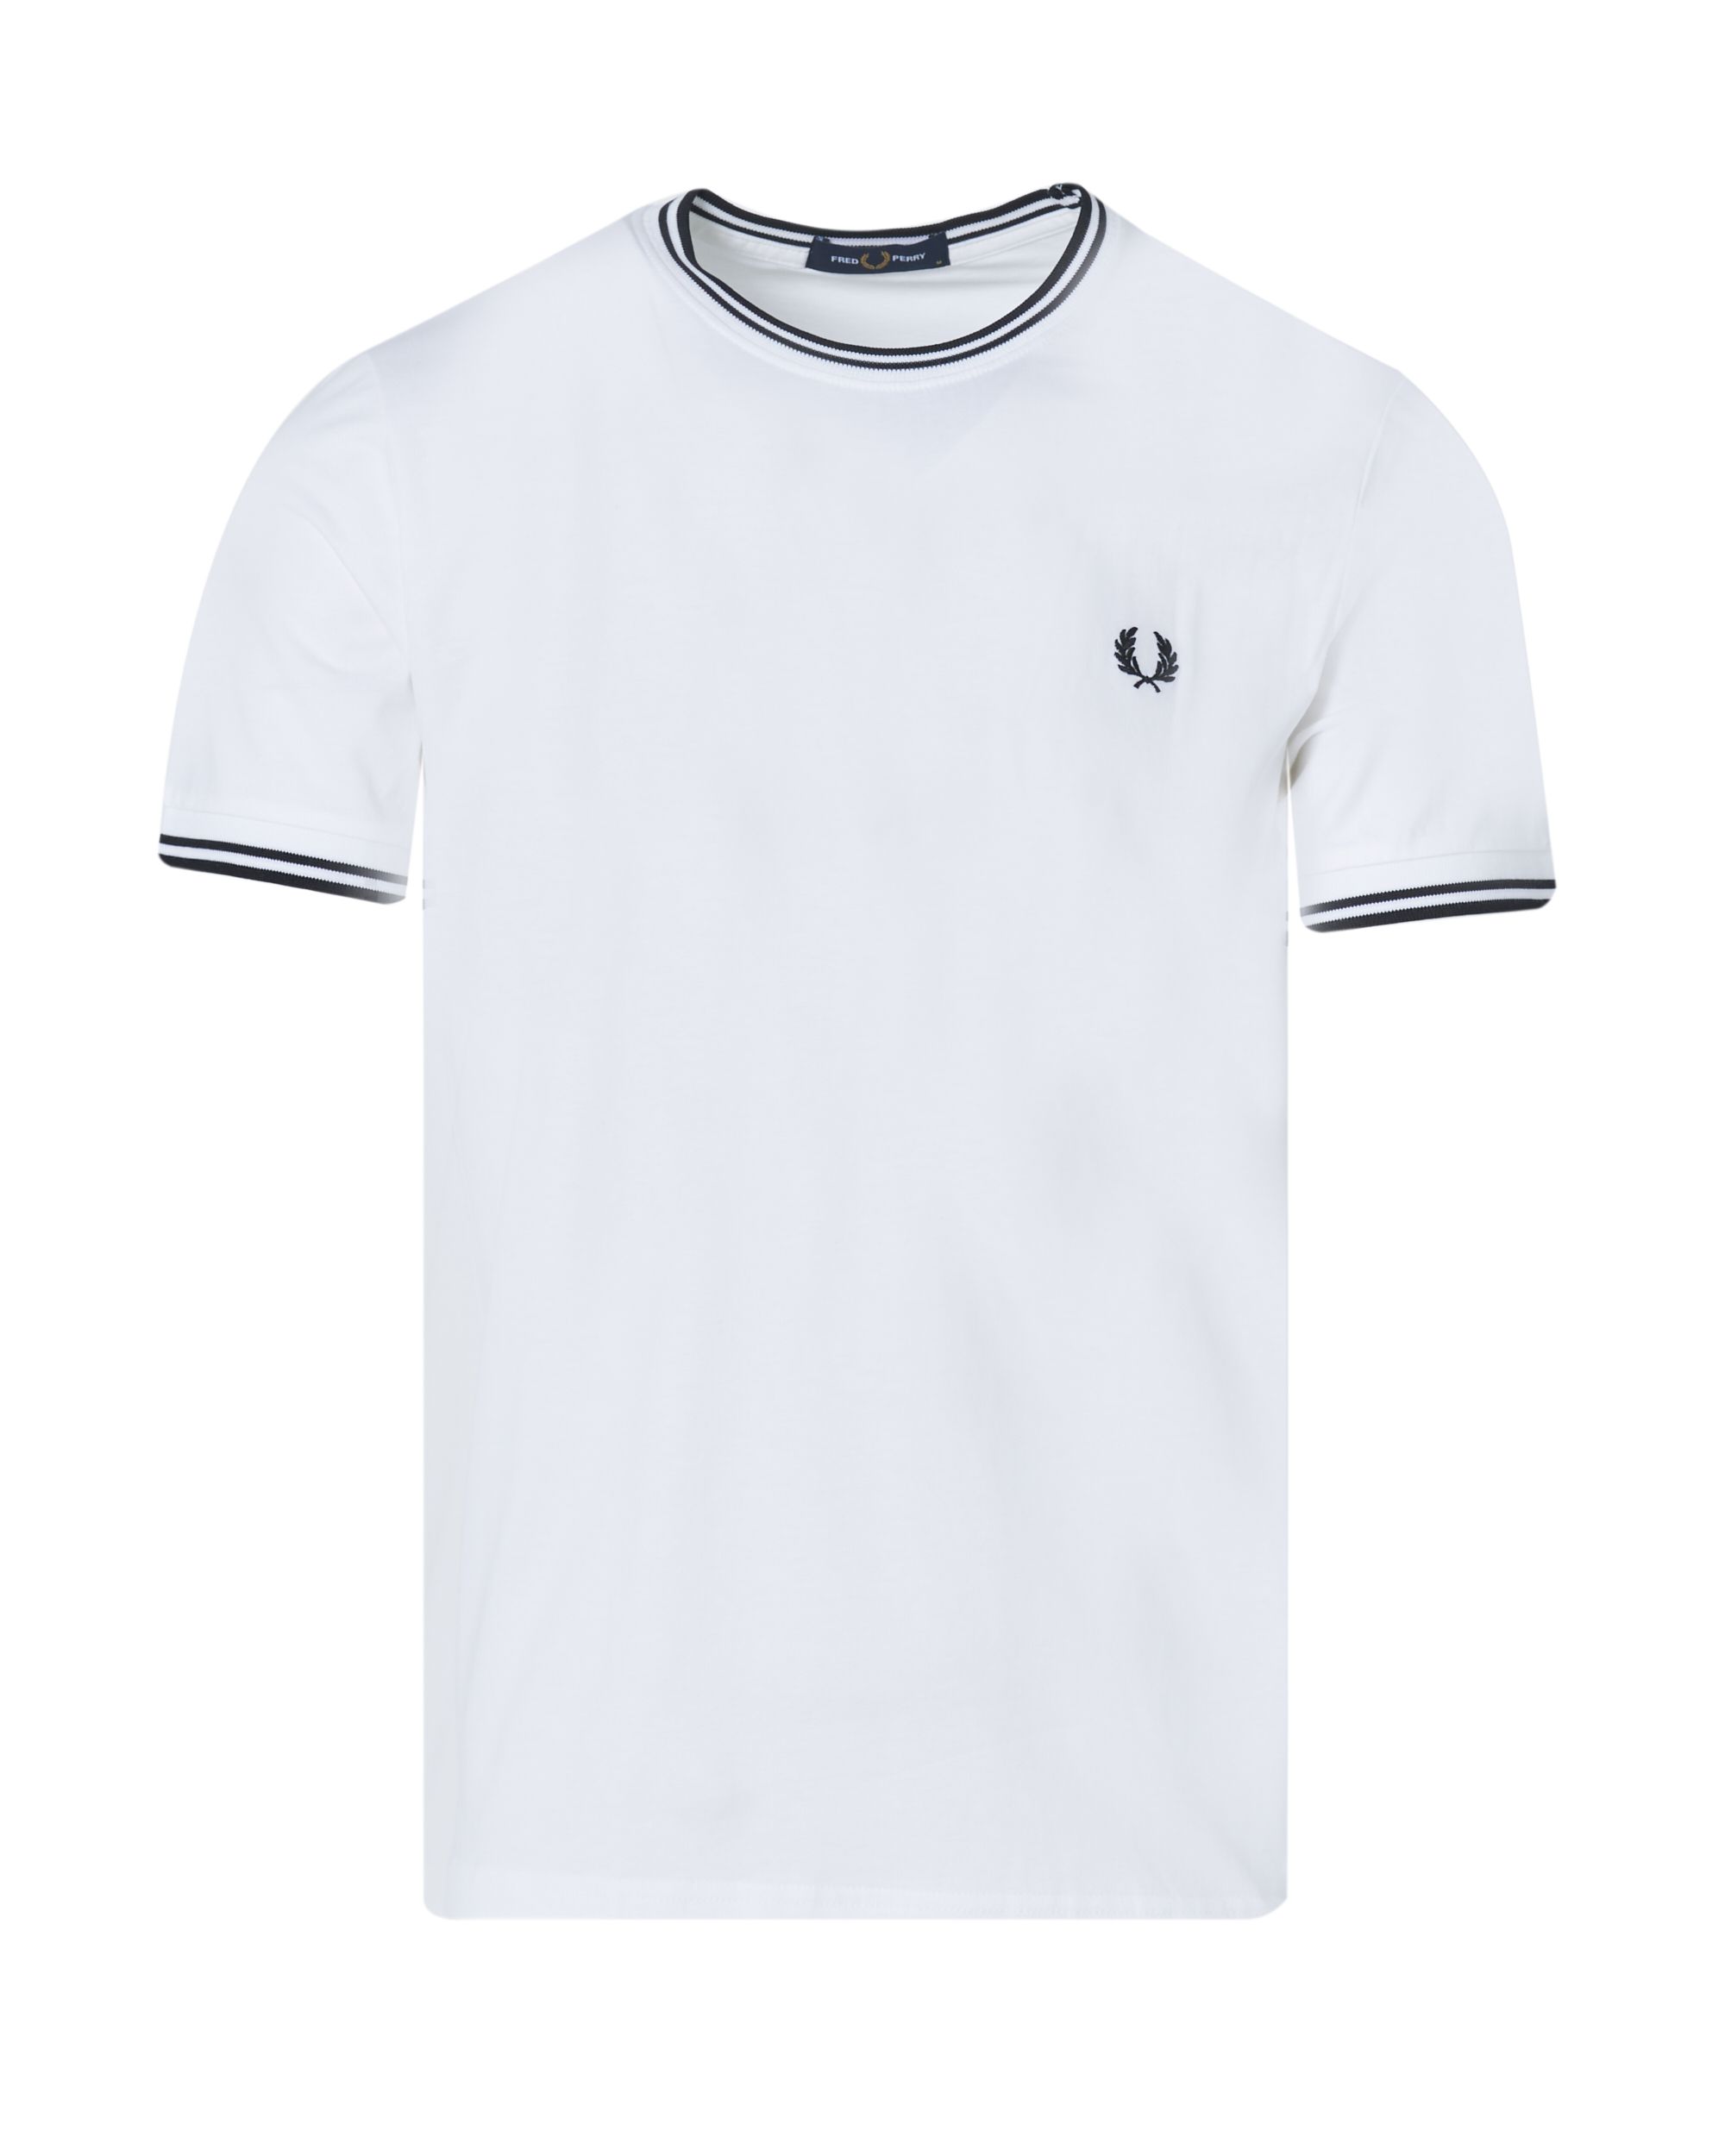 Fred Perry T-shirt KM Wit 083511-001-L